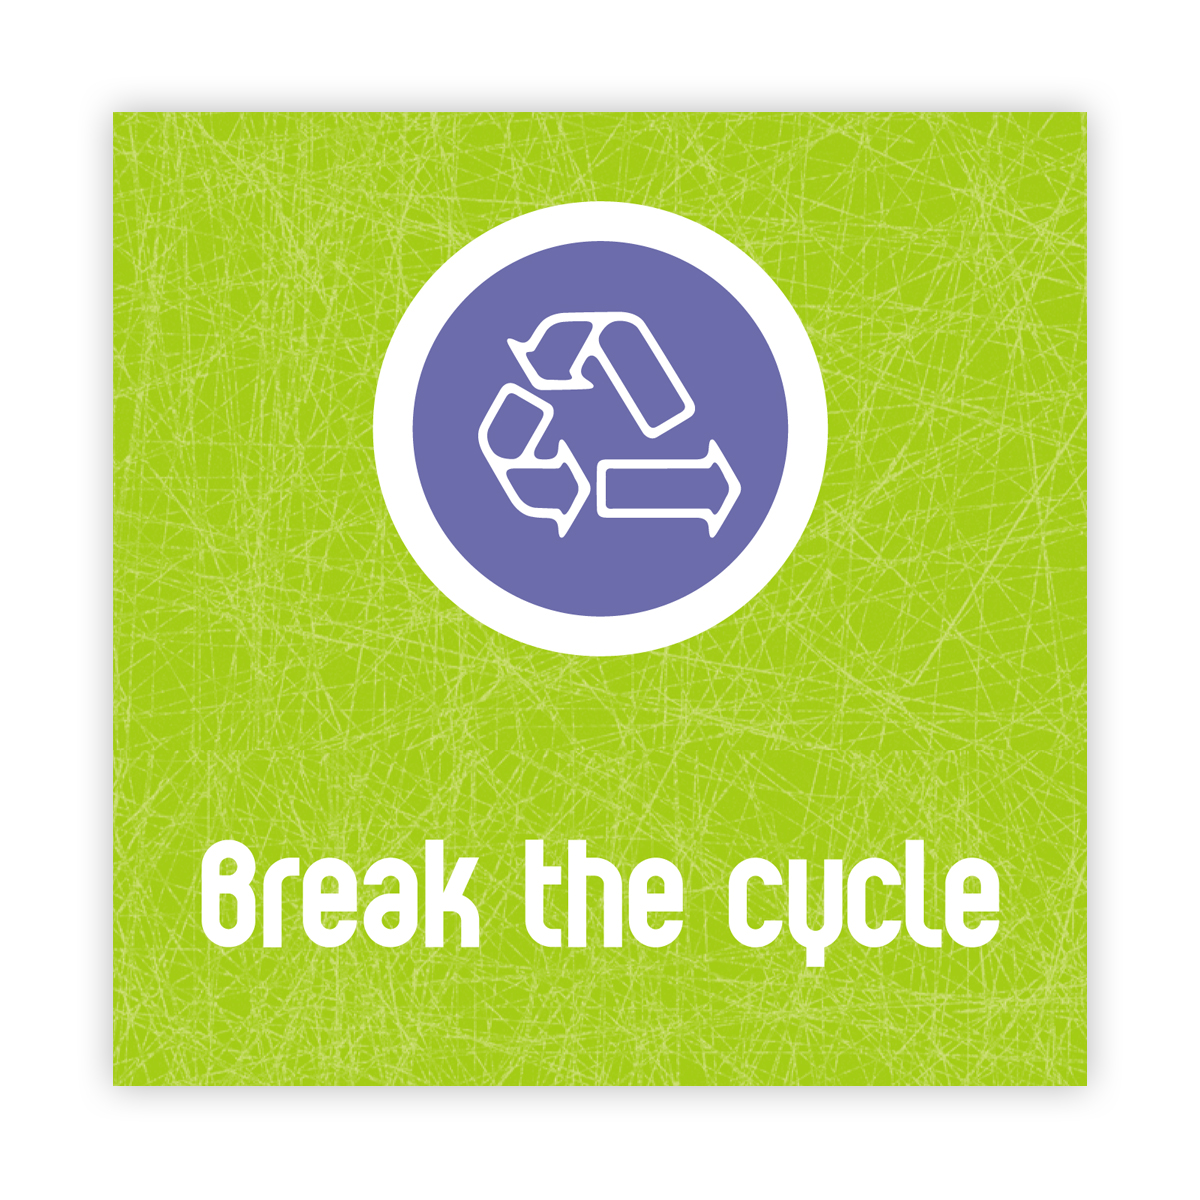 Break the cycle campaign: leaflet